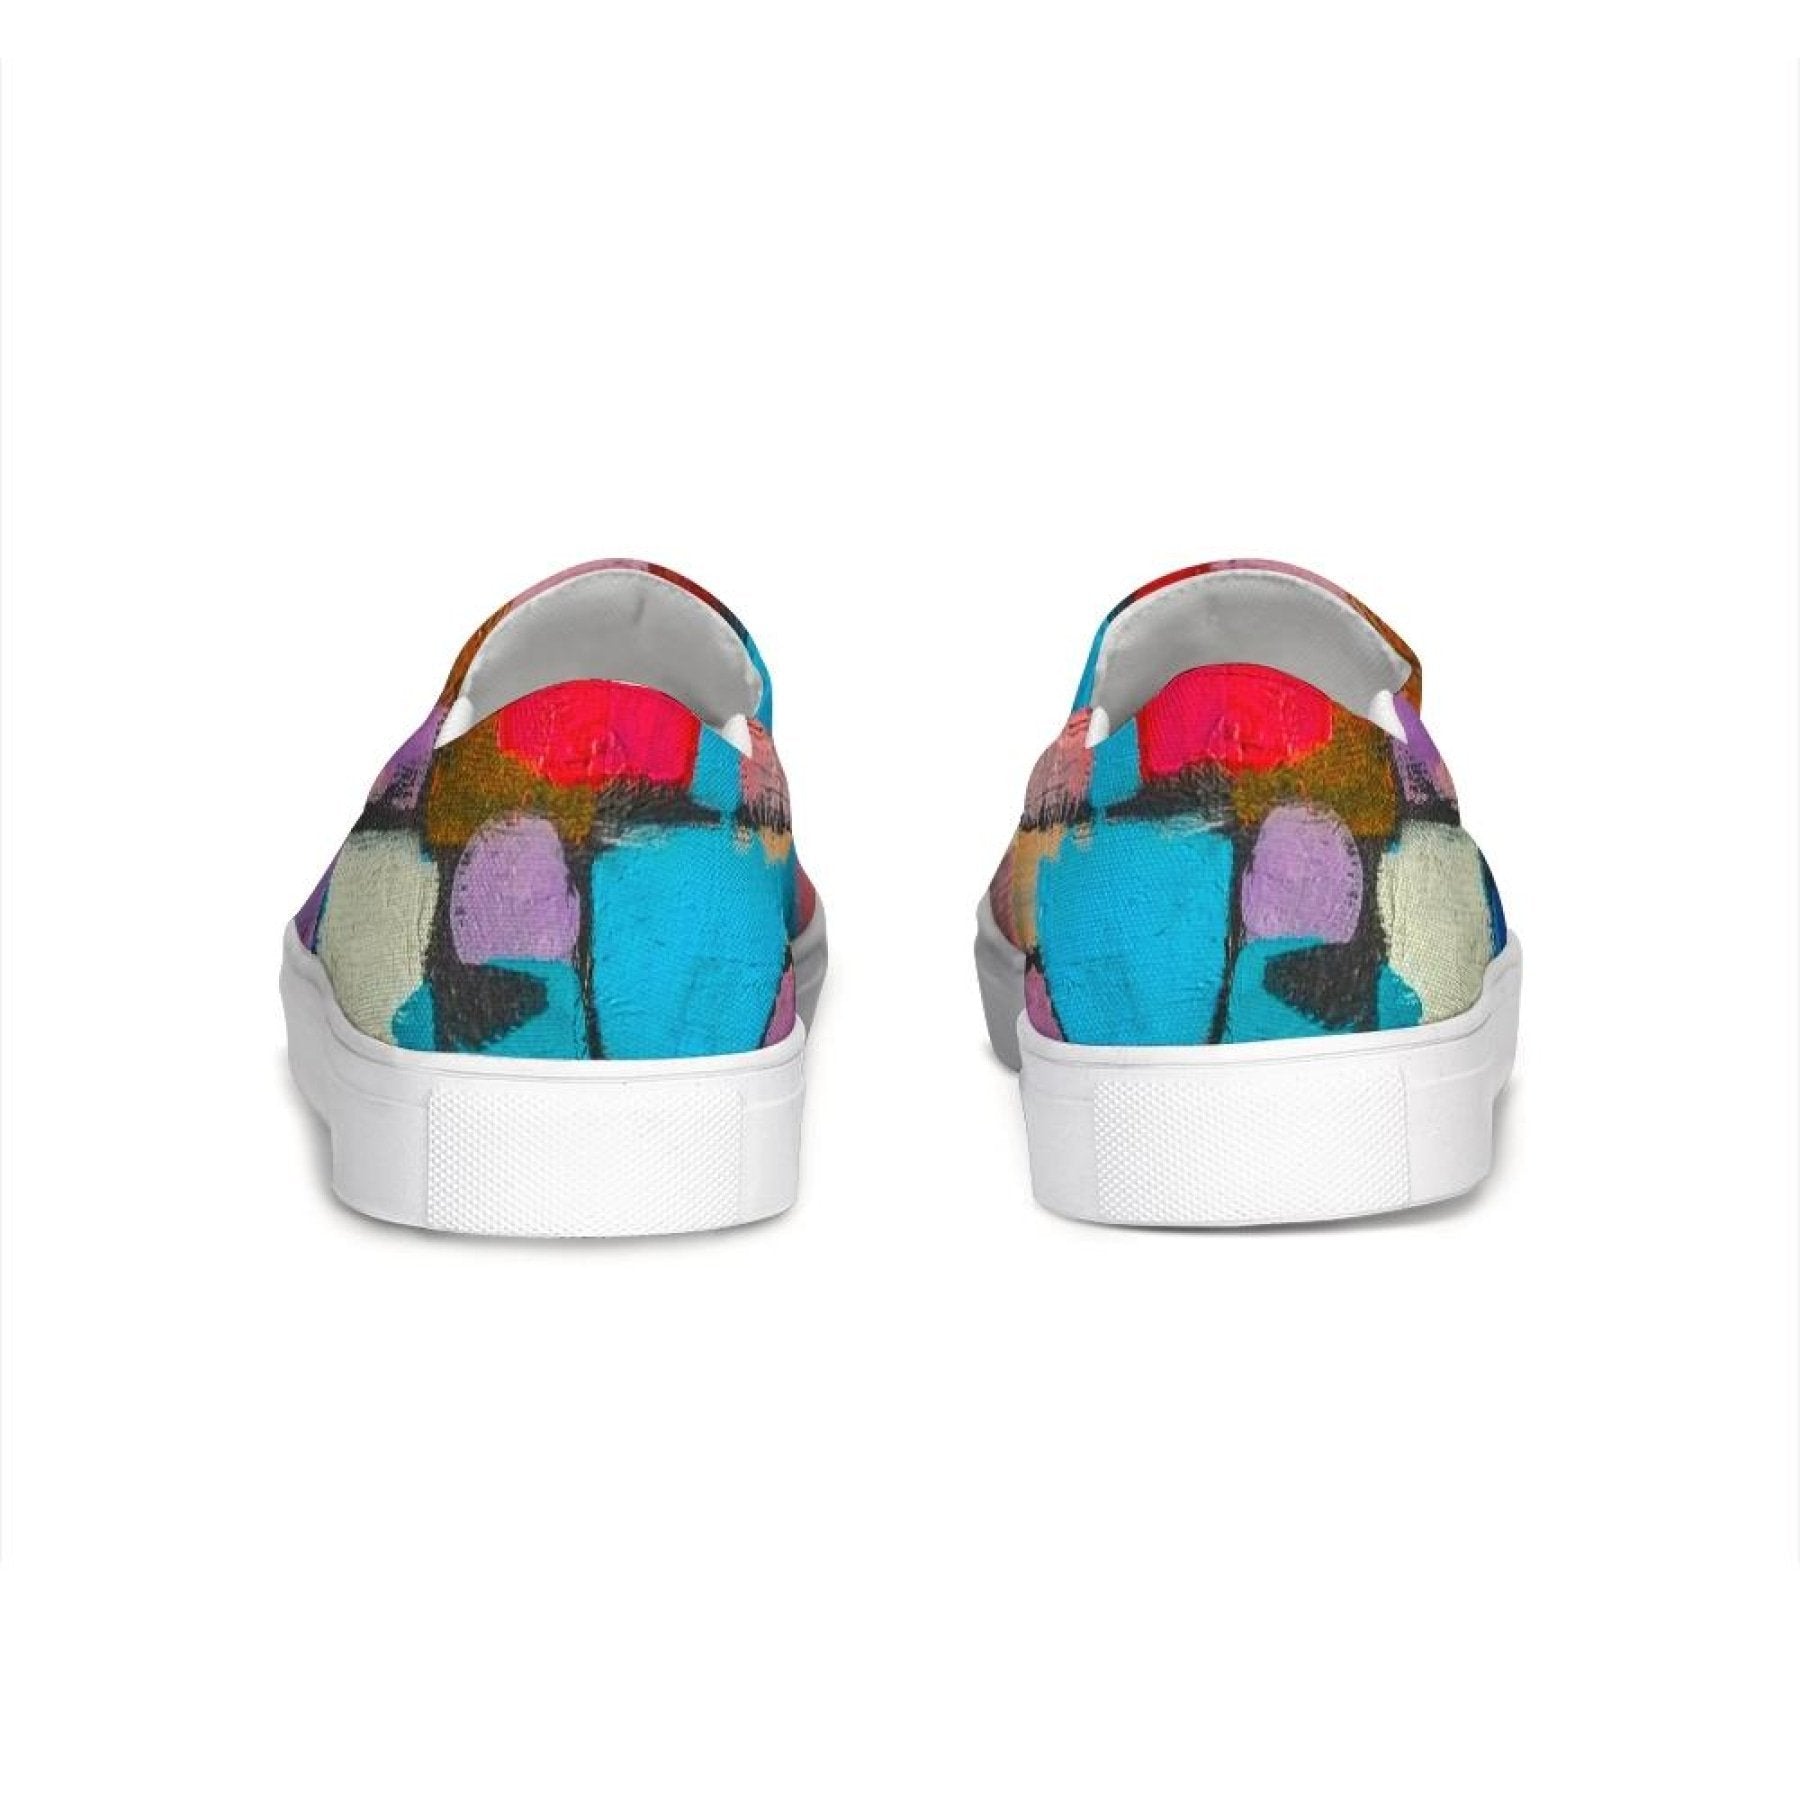 Uniquely You Womens Sneakers - Multicolor Geometric Style Low Top